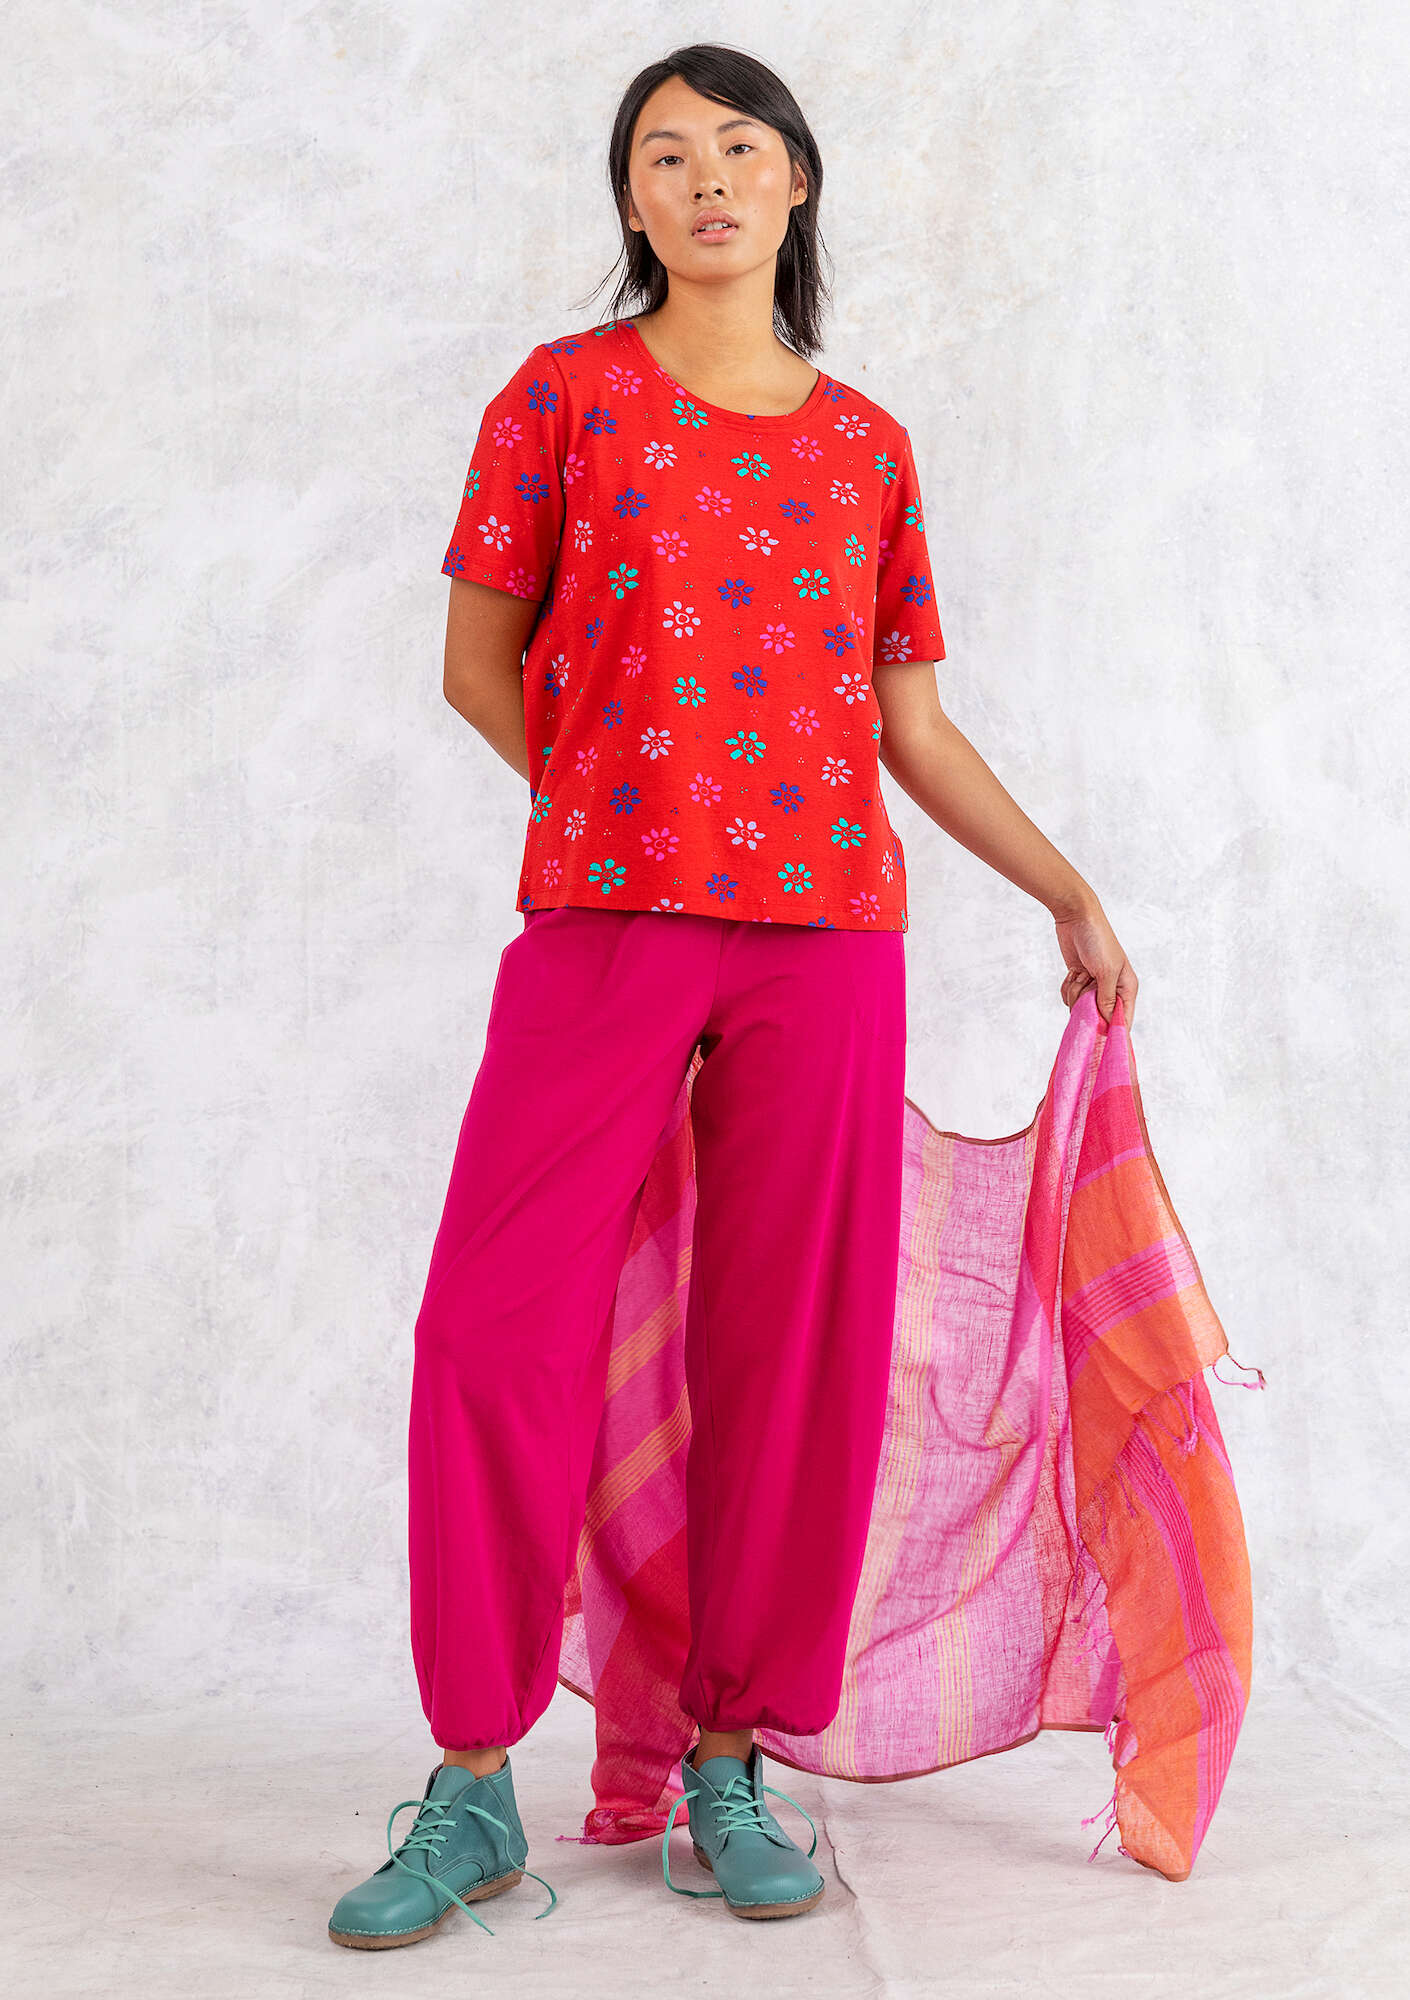 “Ester” T-shirt in organic cotton/elastane parrot red/patterned